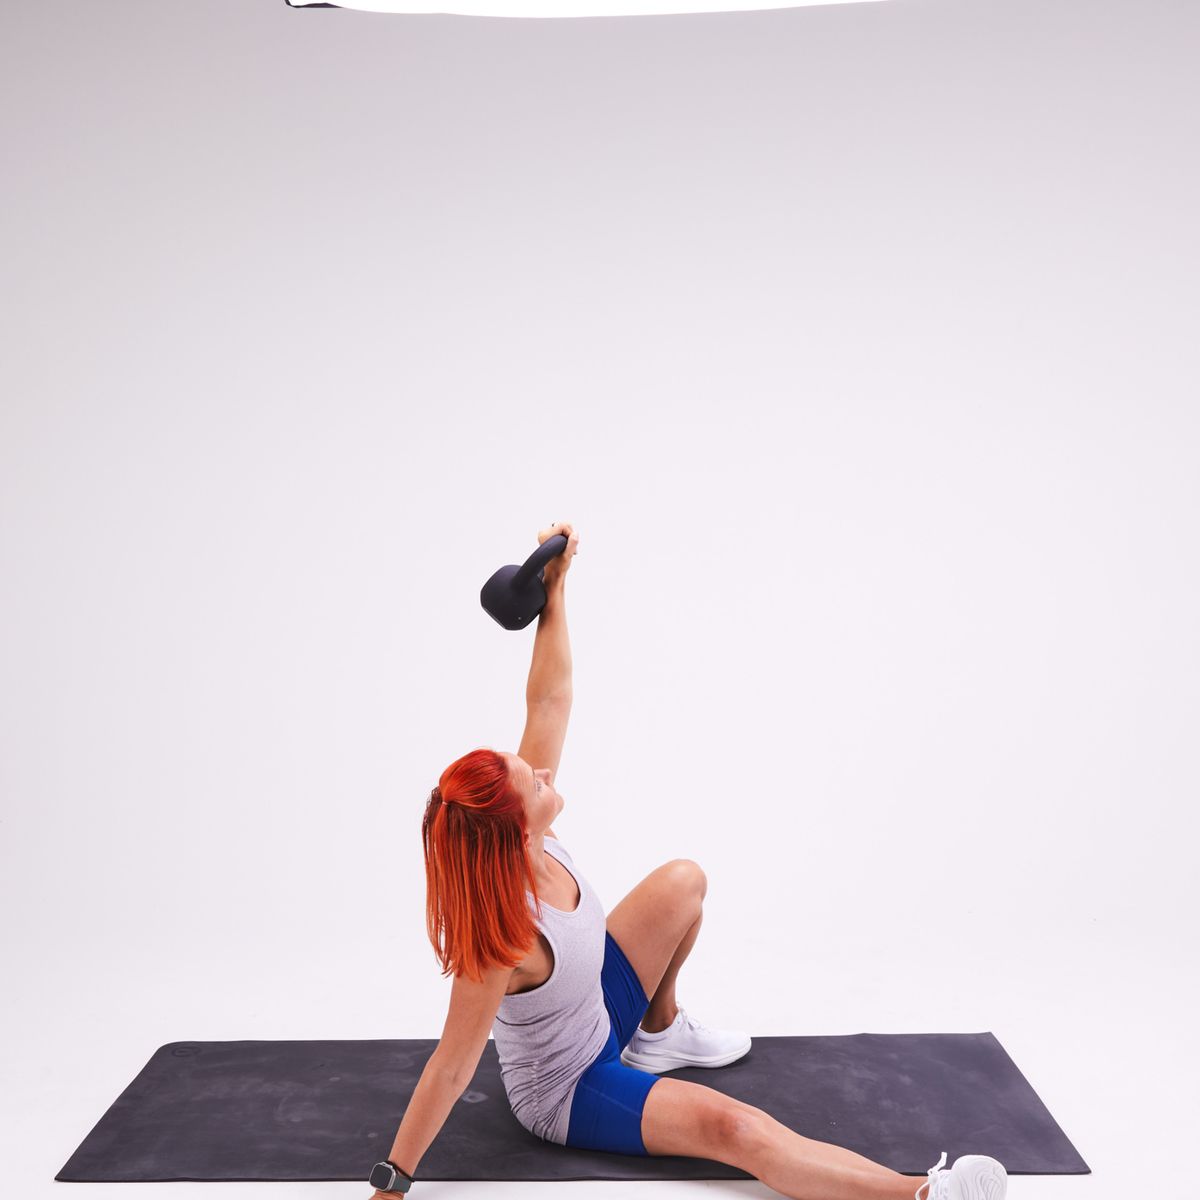 Glute Bridge Exercise: 7 Variations to See and Feel Better Results